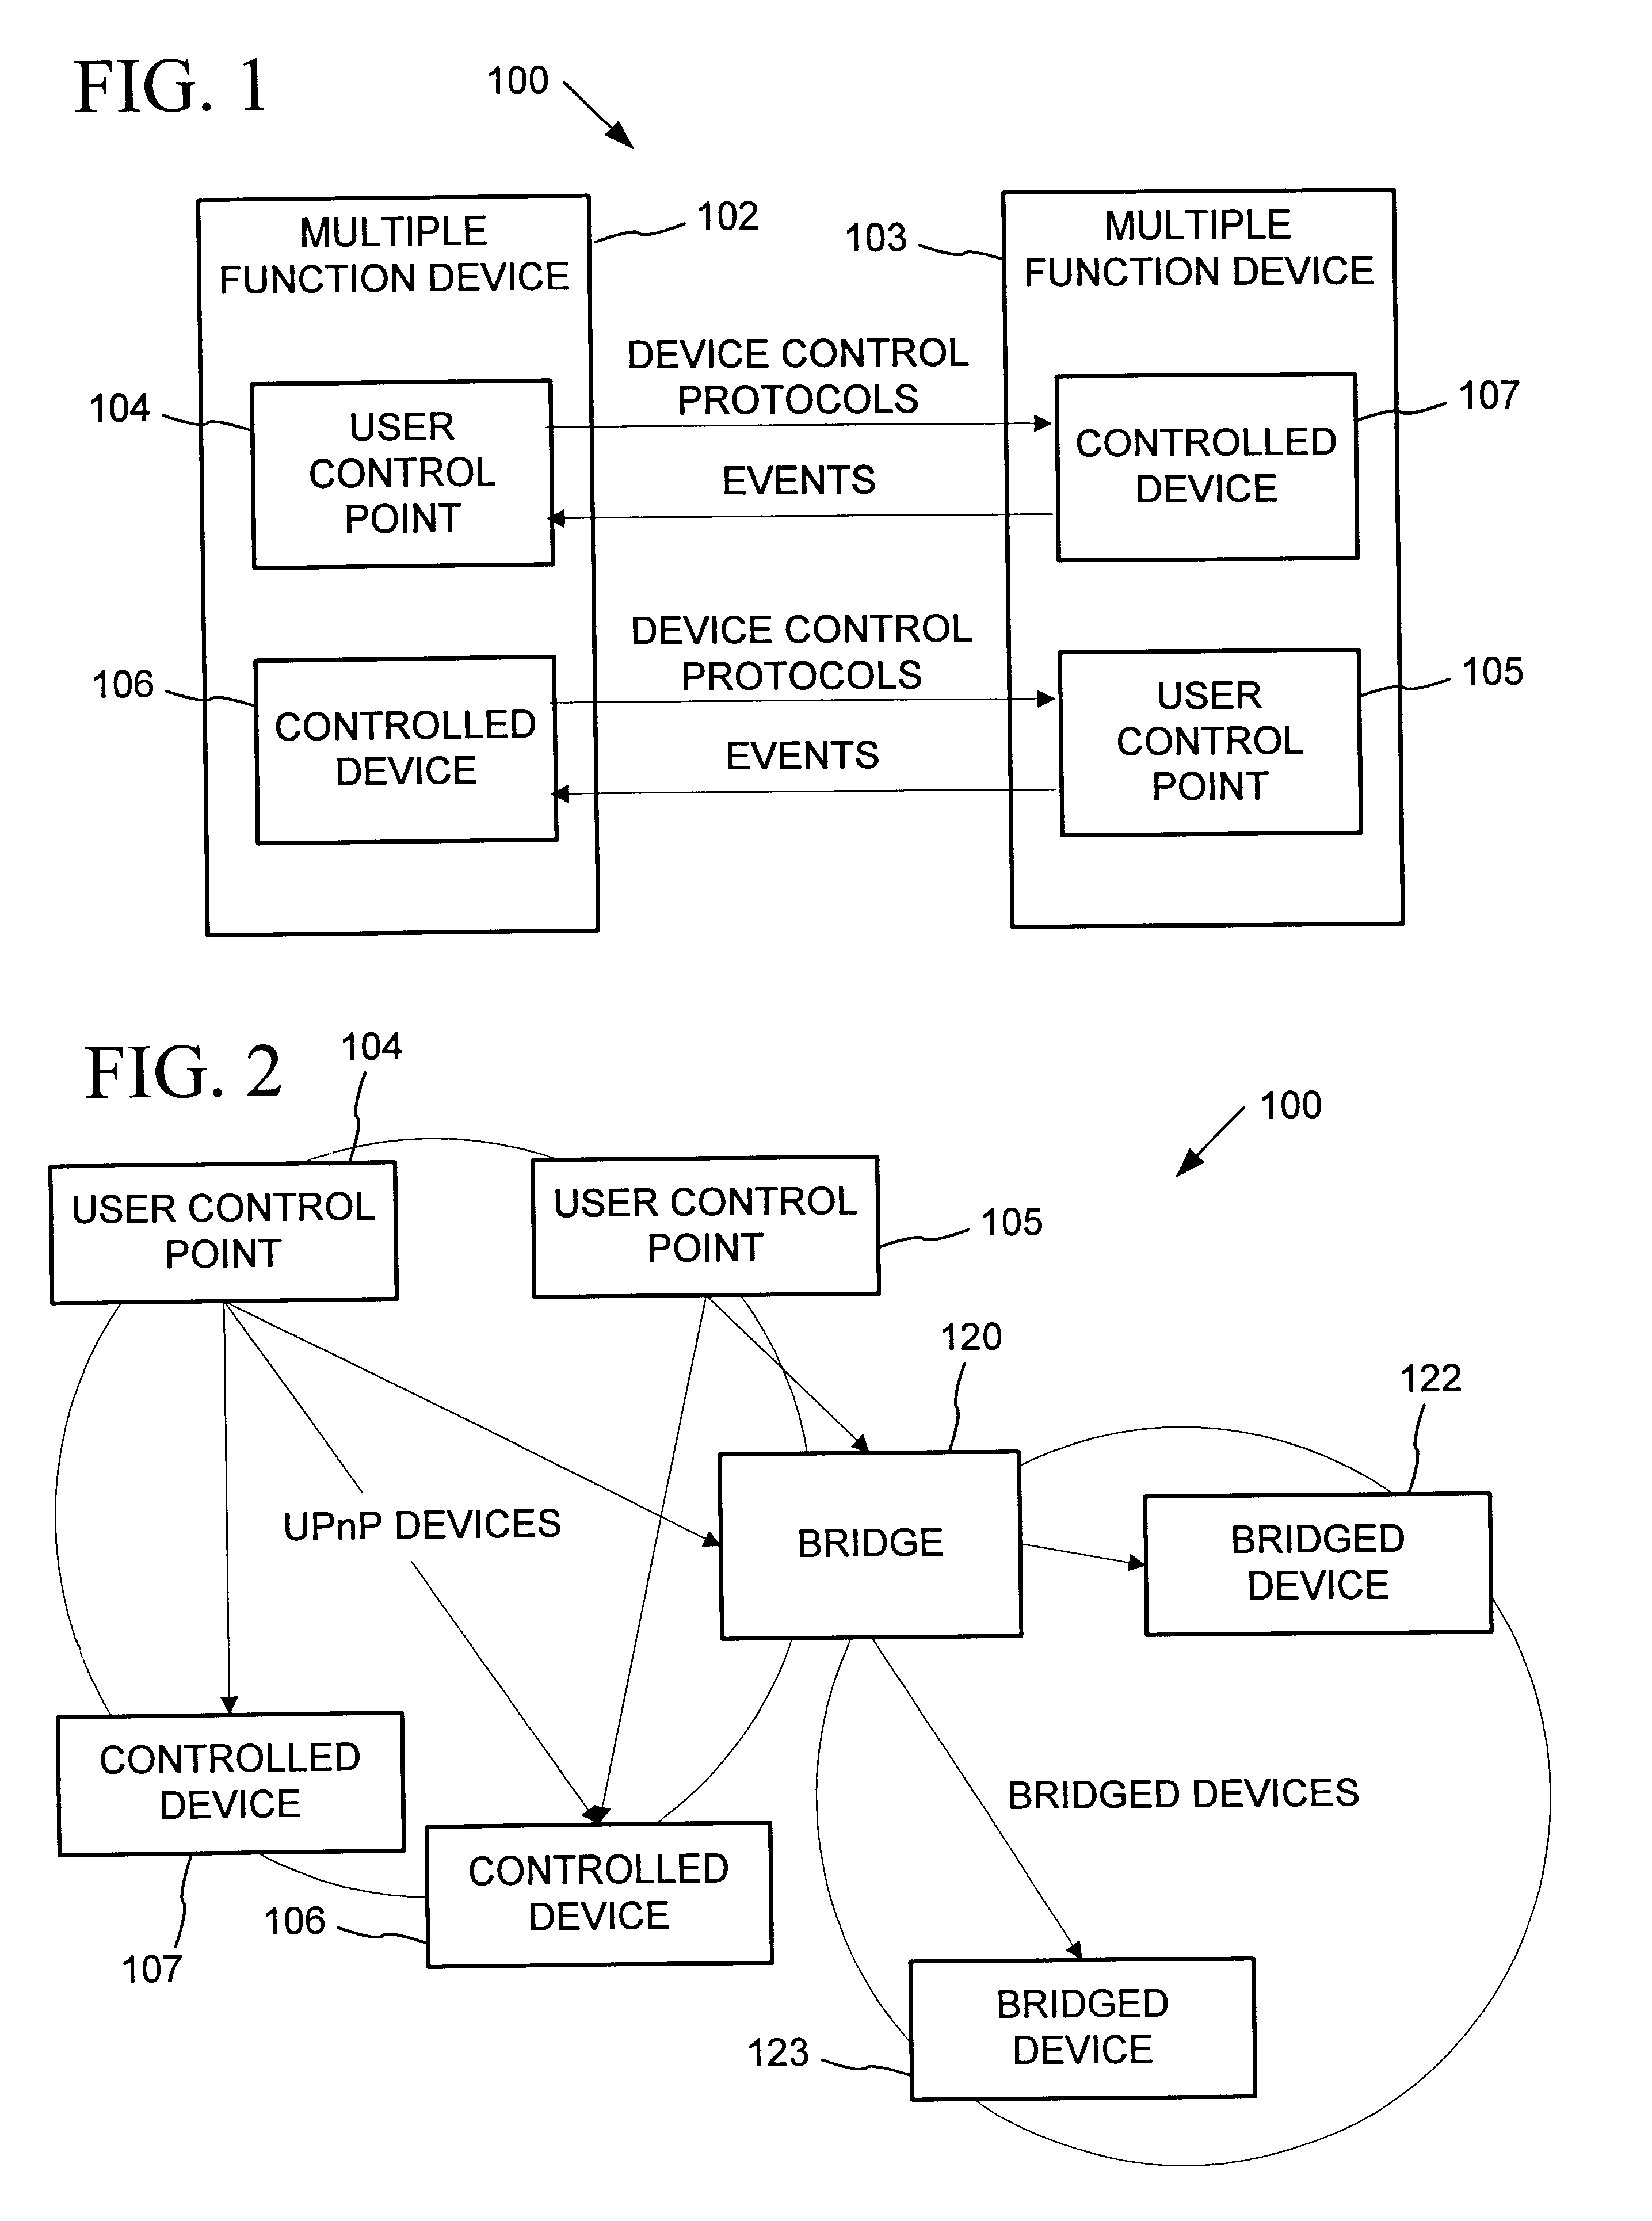 Synchronization of controlled device state using state table and eventing in data-driven remote device control model